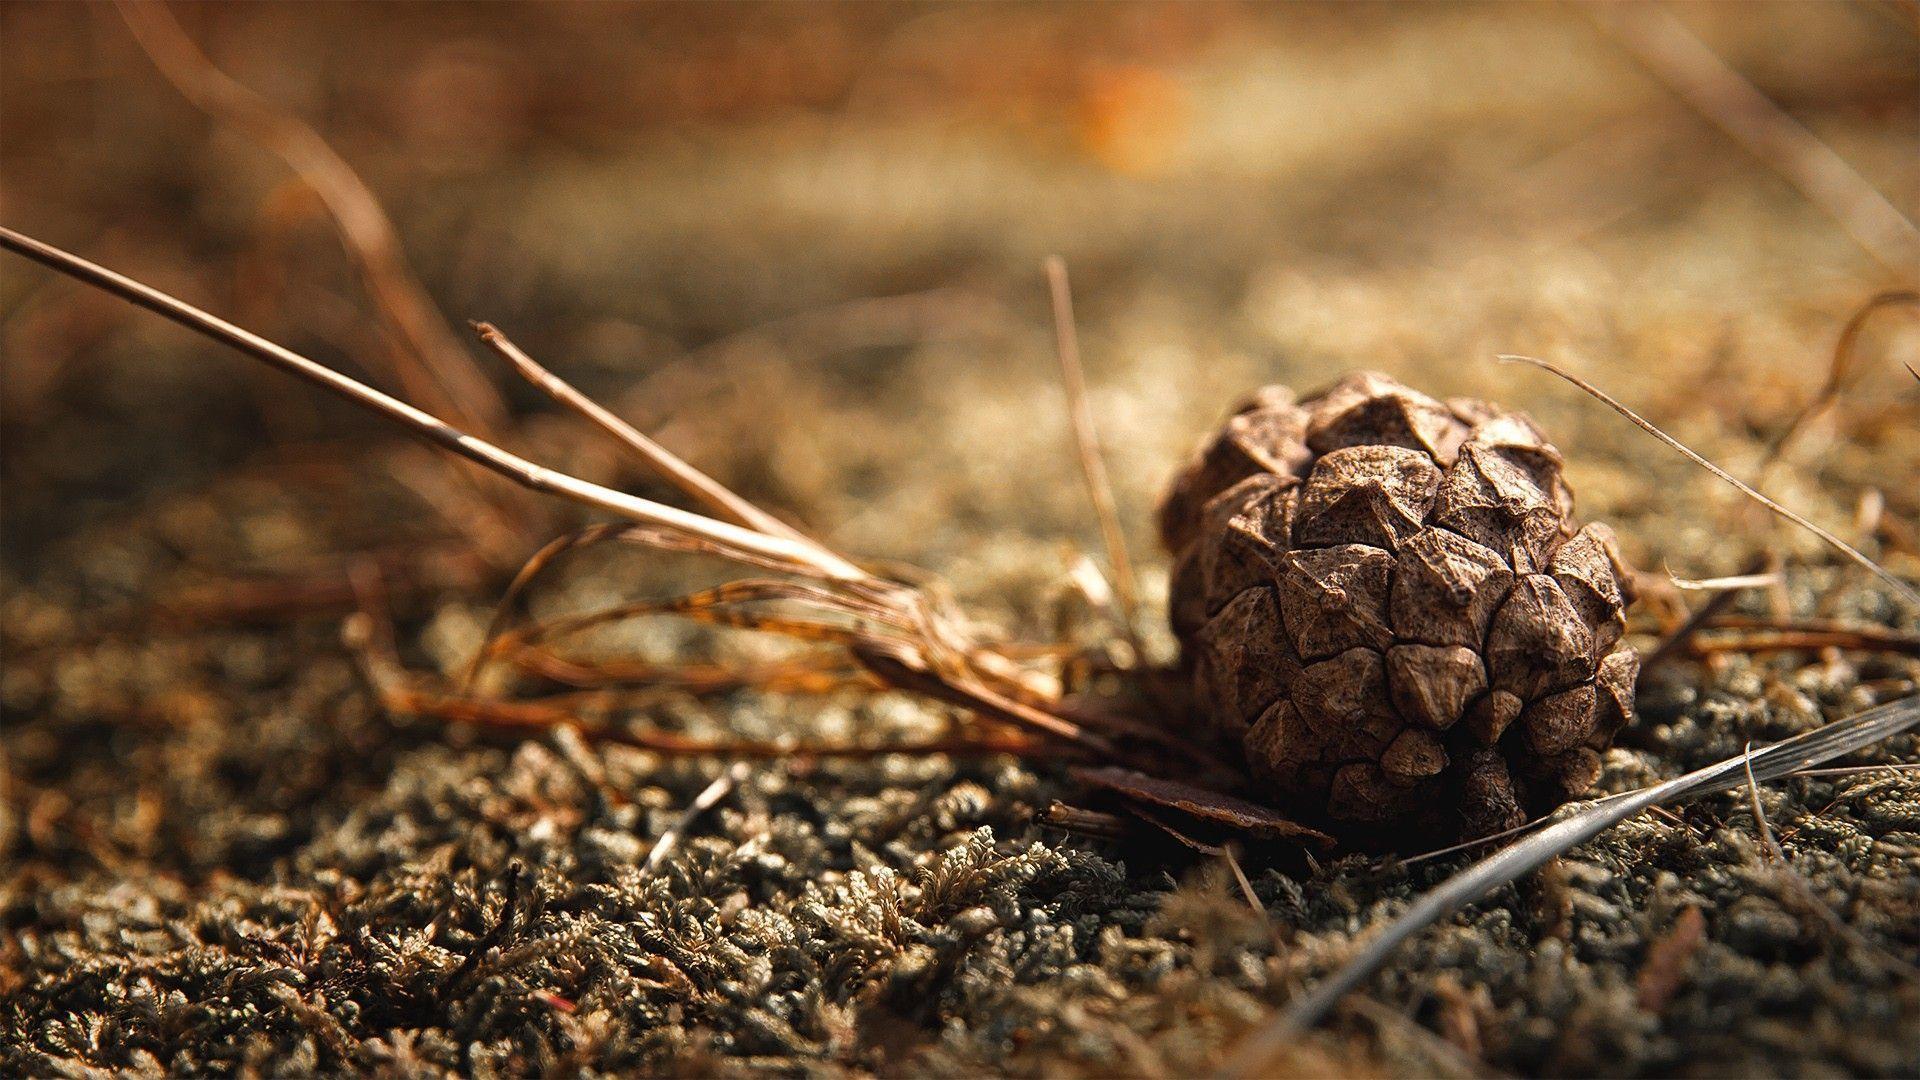 Just a pine cone [1920x1080]